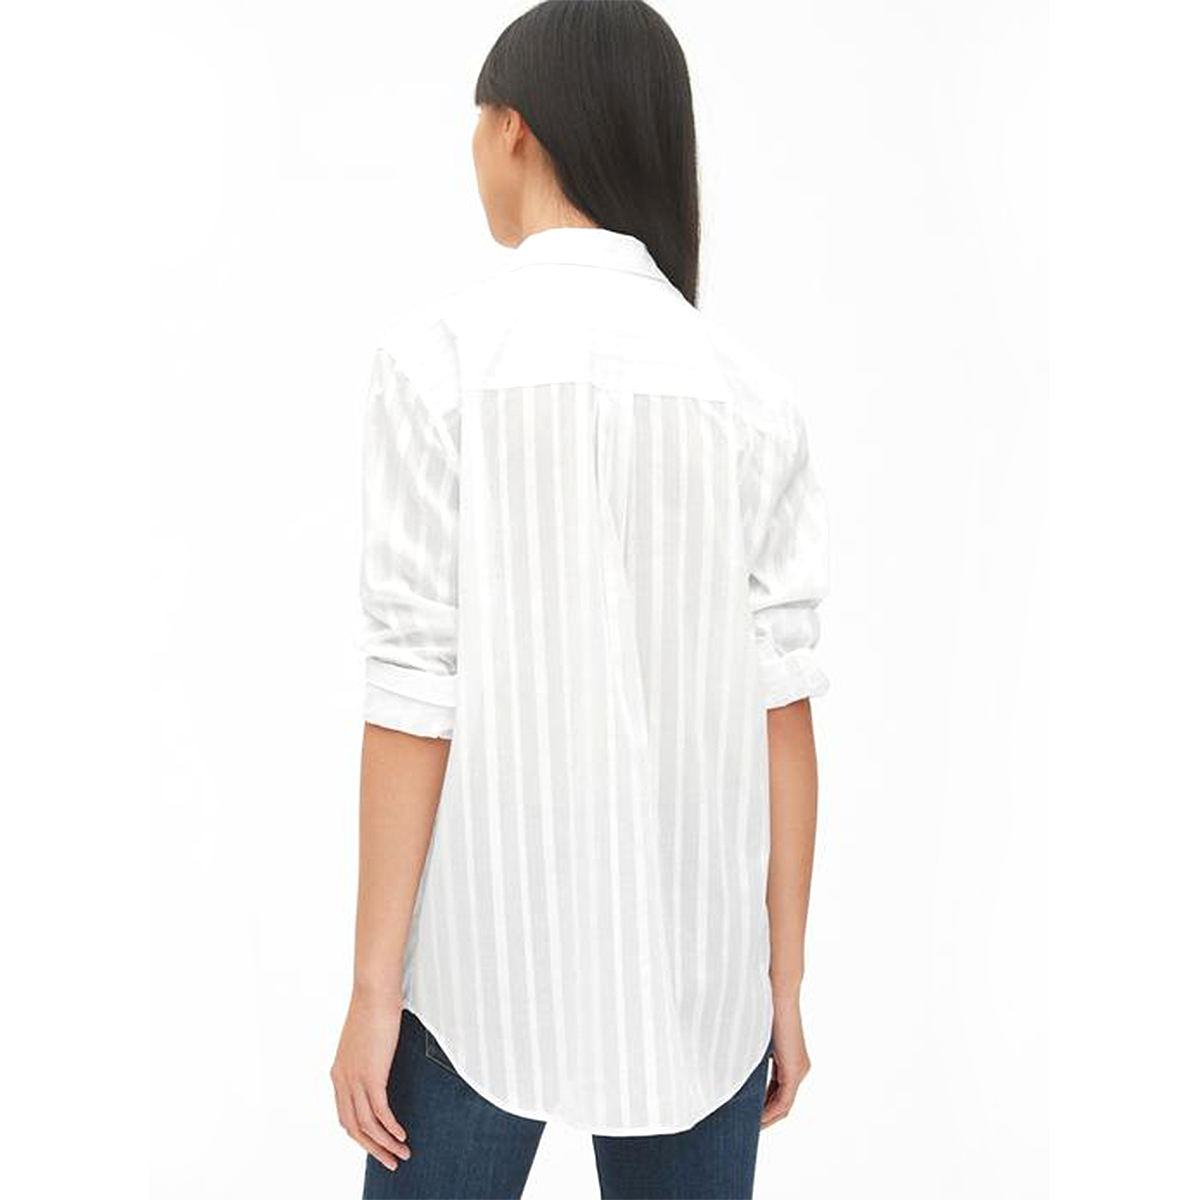 Gap Self Striped Regular Fit Full Sleeve Shirt with Yoke Open Buttons & Patch Pocket - White